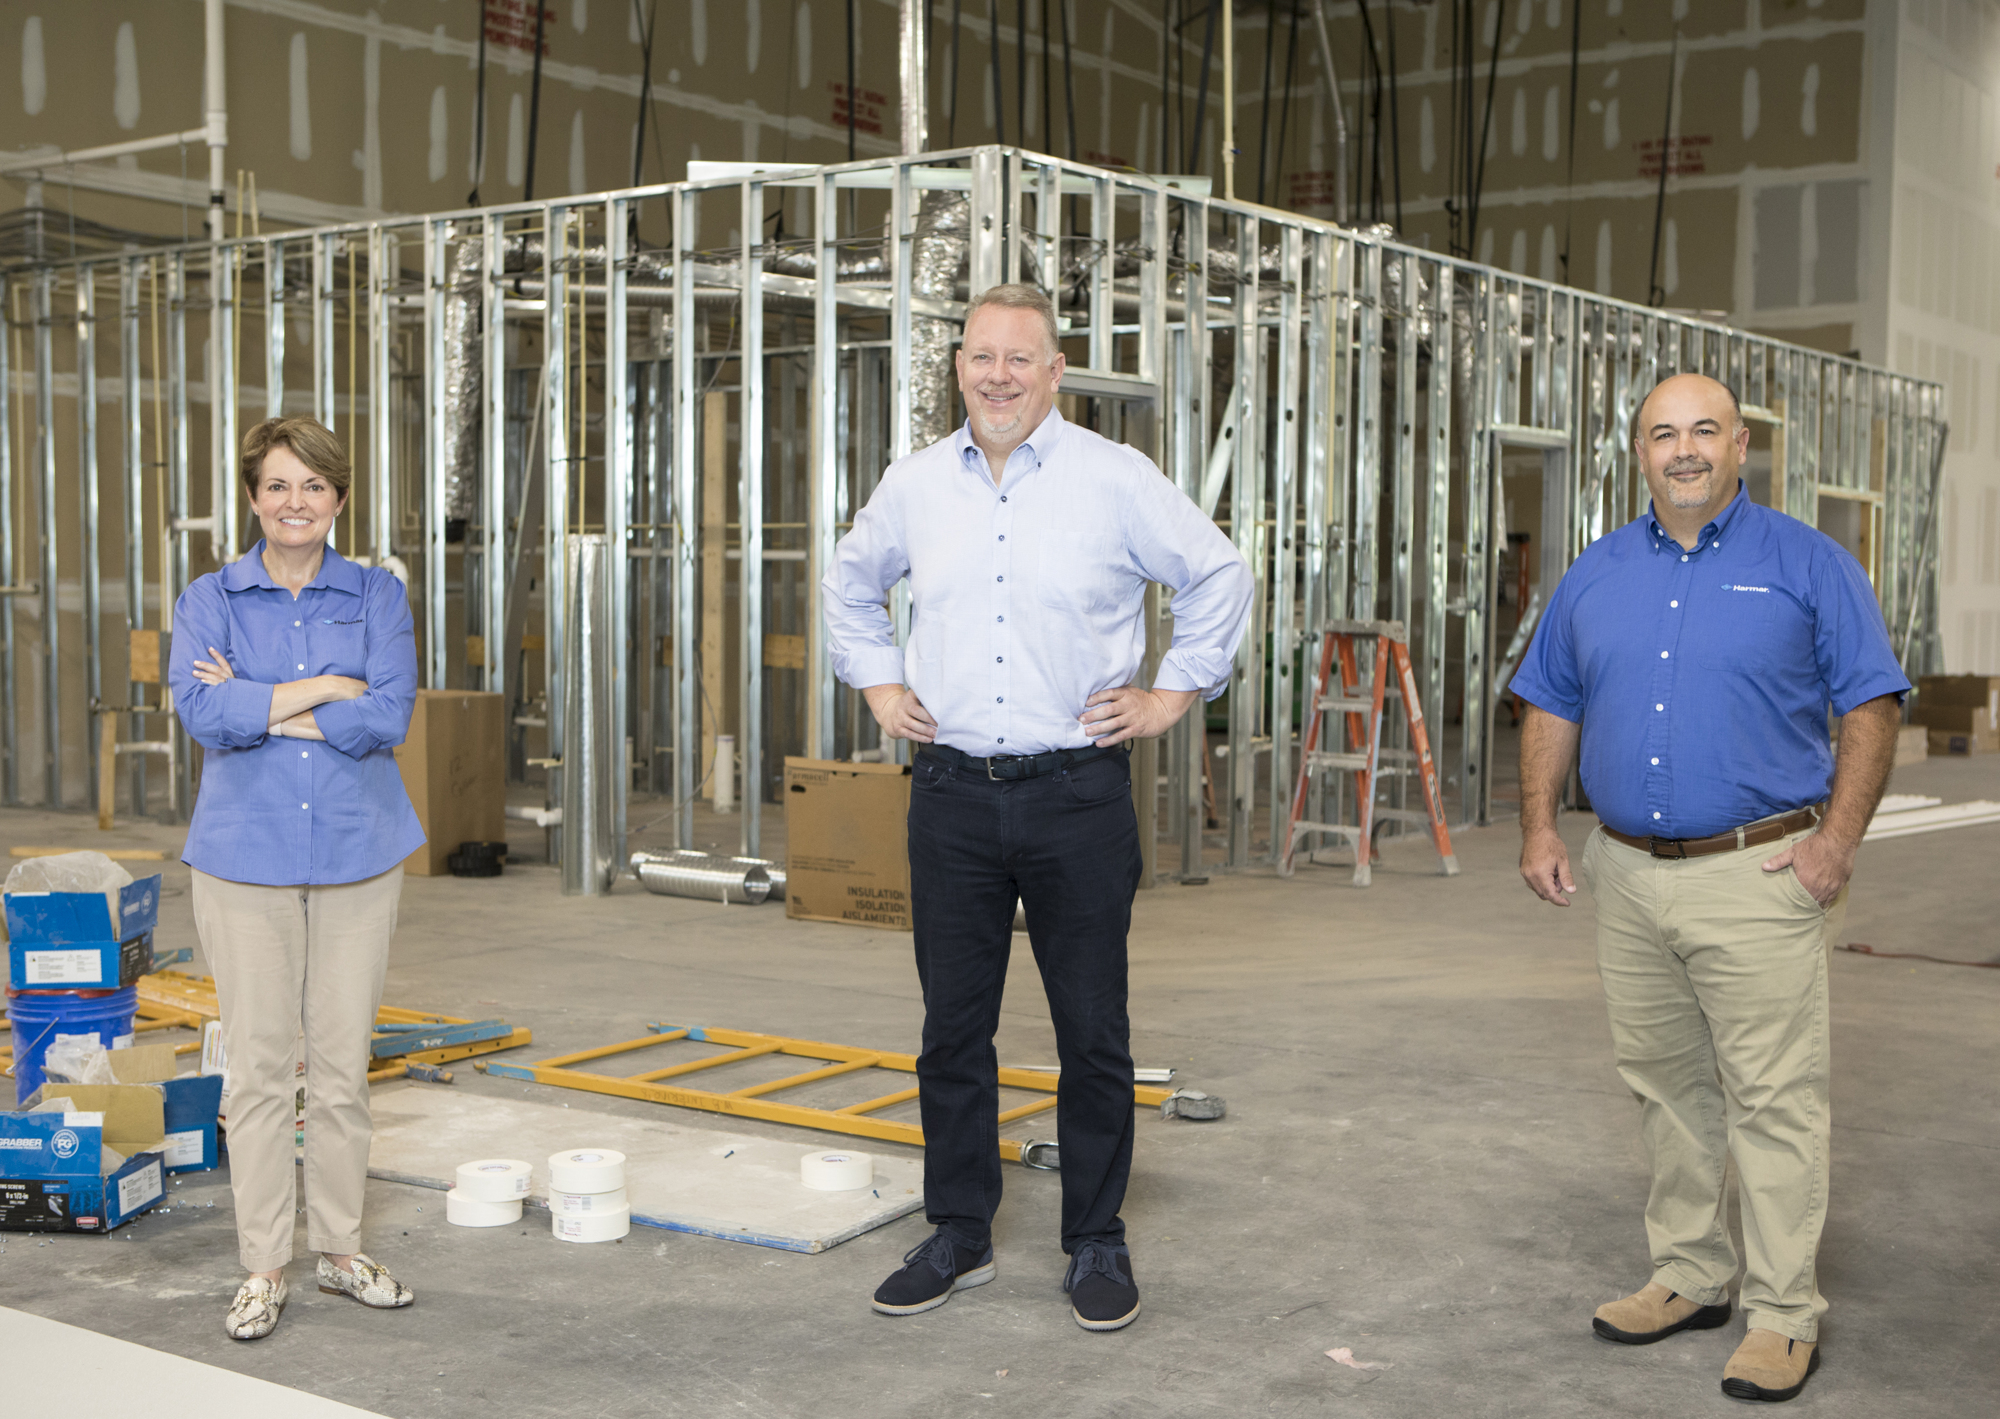 Mark Wemple. Harmar executives Joe Ayette, CEO Steve Dawson and Sarah Puls are helping guide a major move the company is executing.